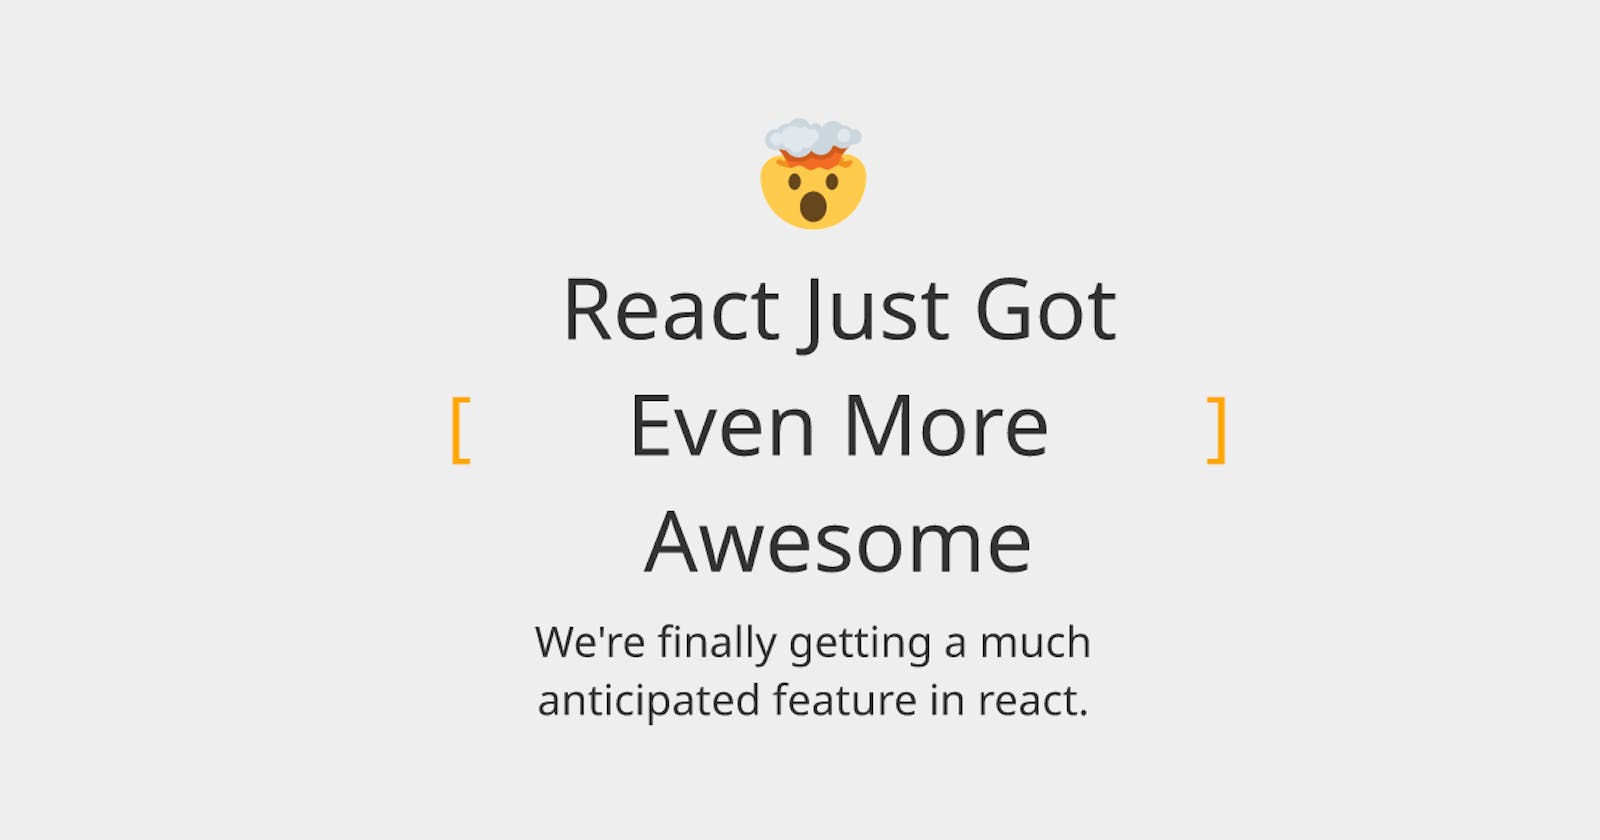 React Just Got Even More Awesome